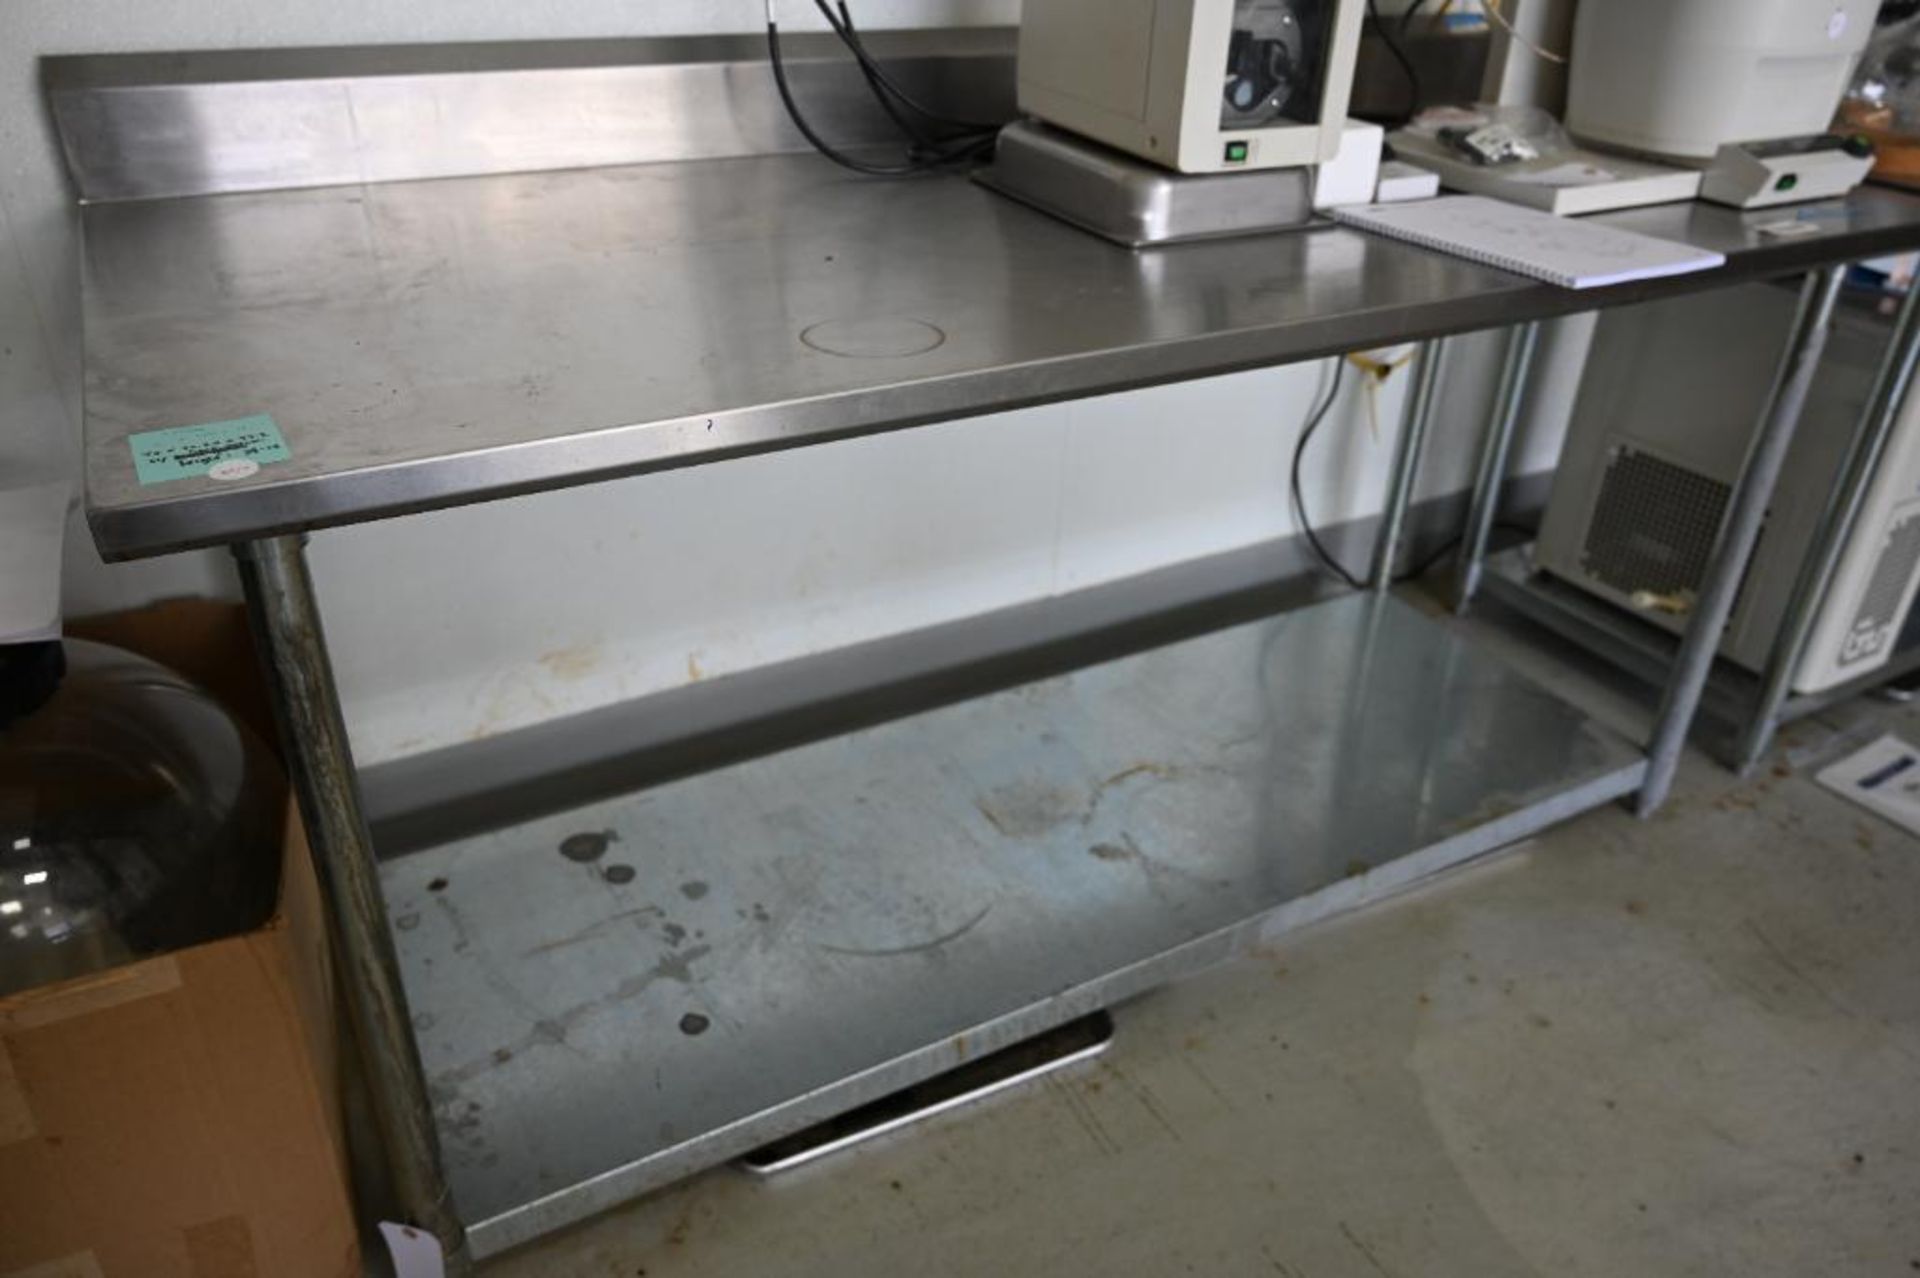 72" x 30.25" x 34.5" Stainless Steel Table with Backsplash - Image 4 of 5